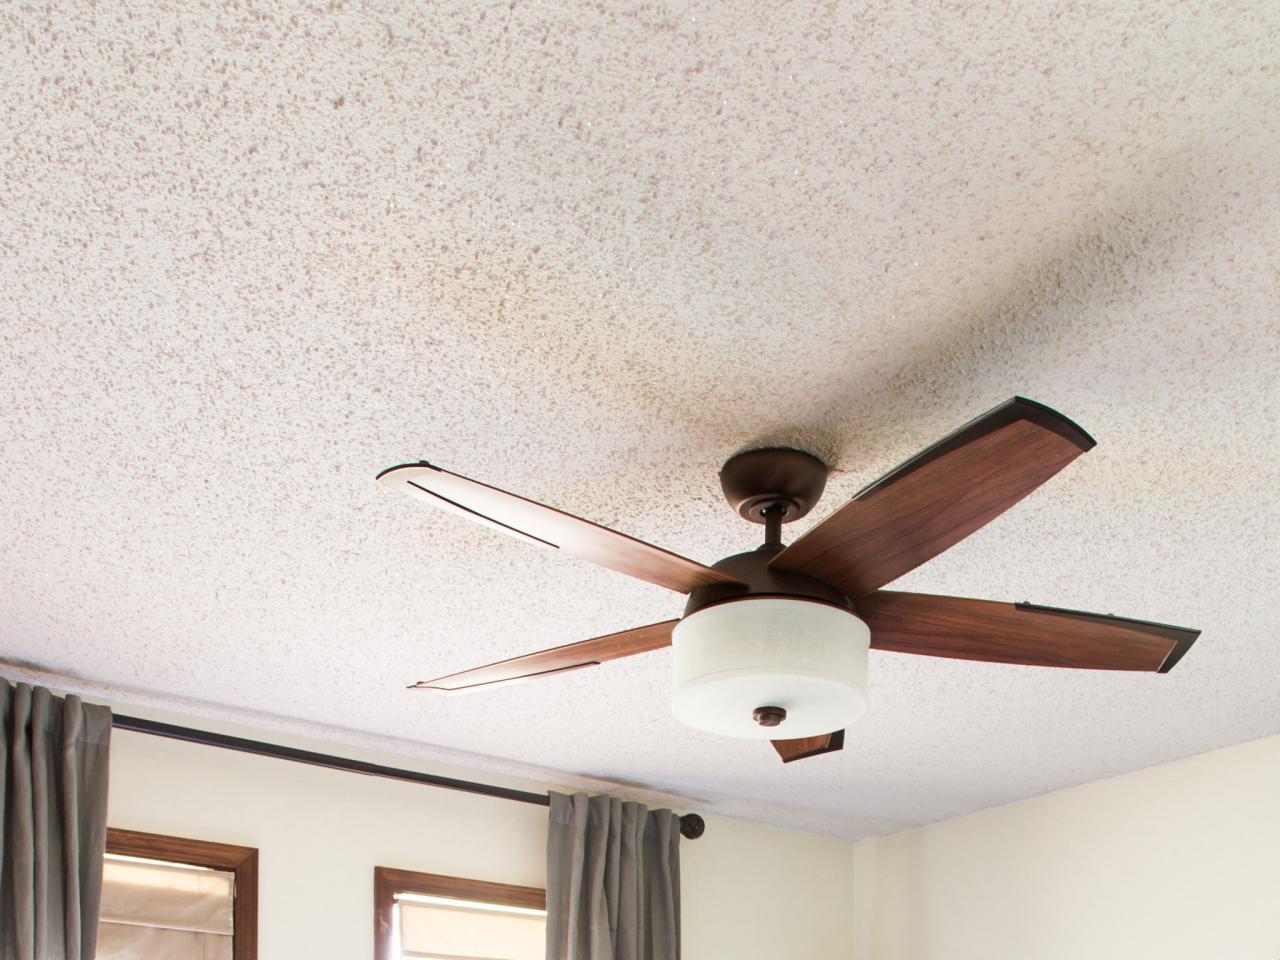 How To Remove A Ceiling How to Remove a Popcorn Ceiling | HGTV